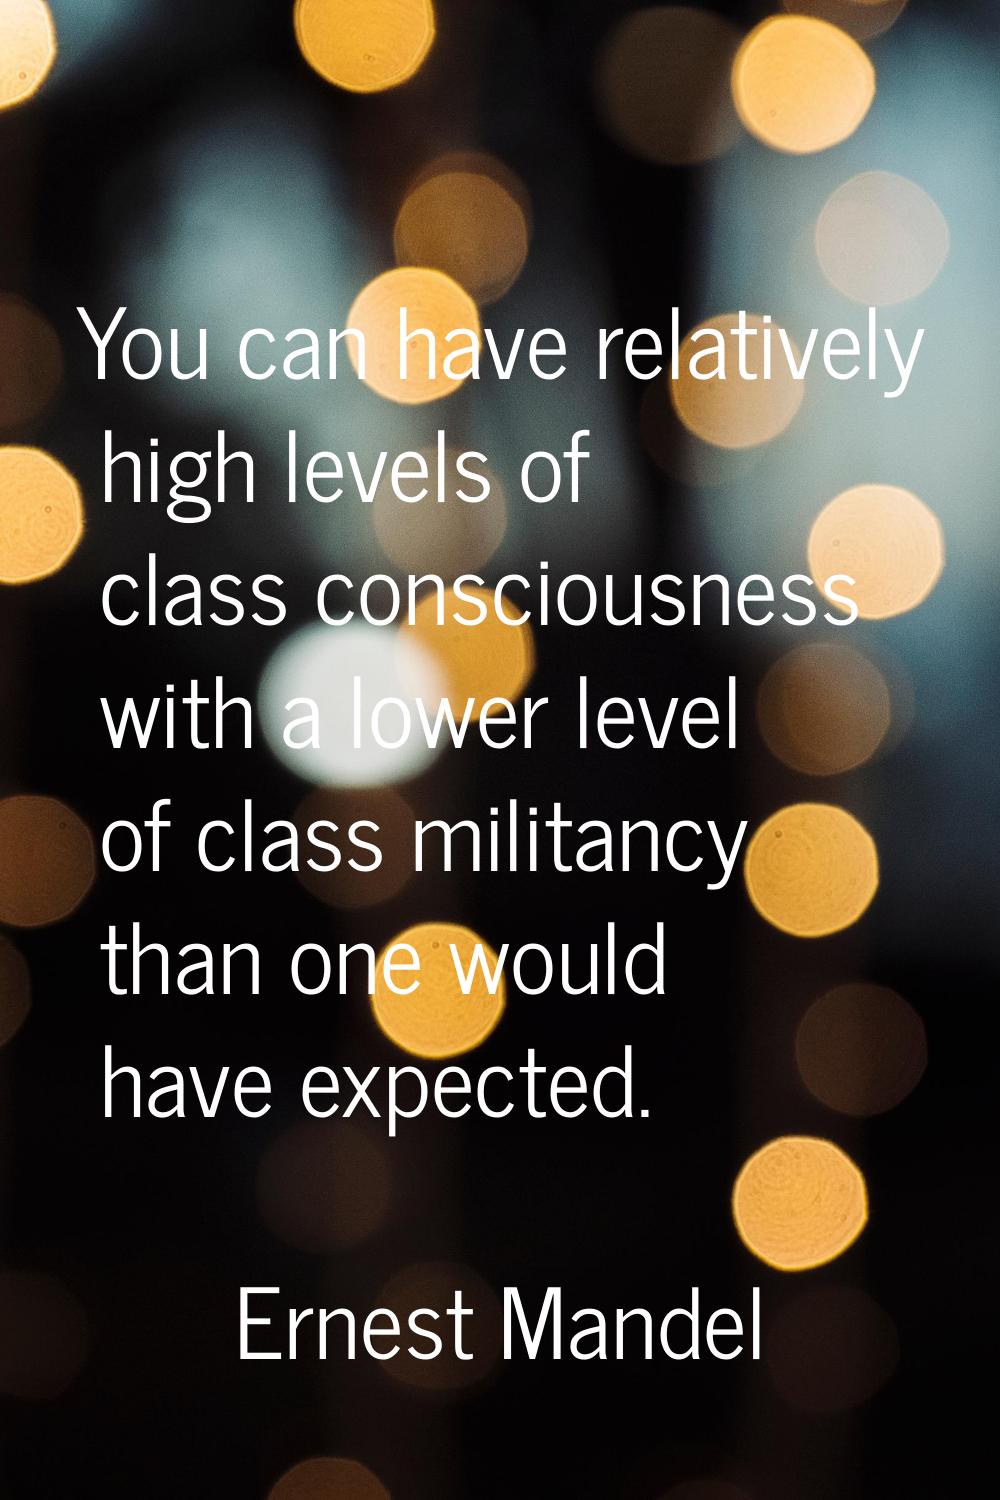 You can have relatively high levels of class consciousness with a lower level of class militancy th